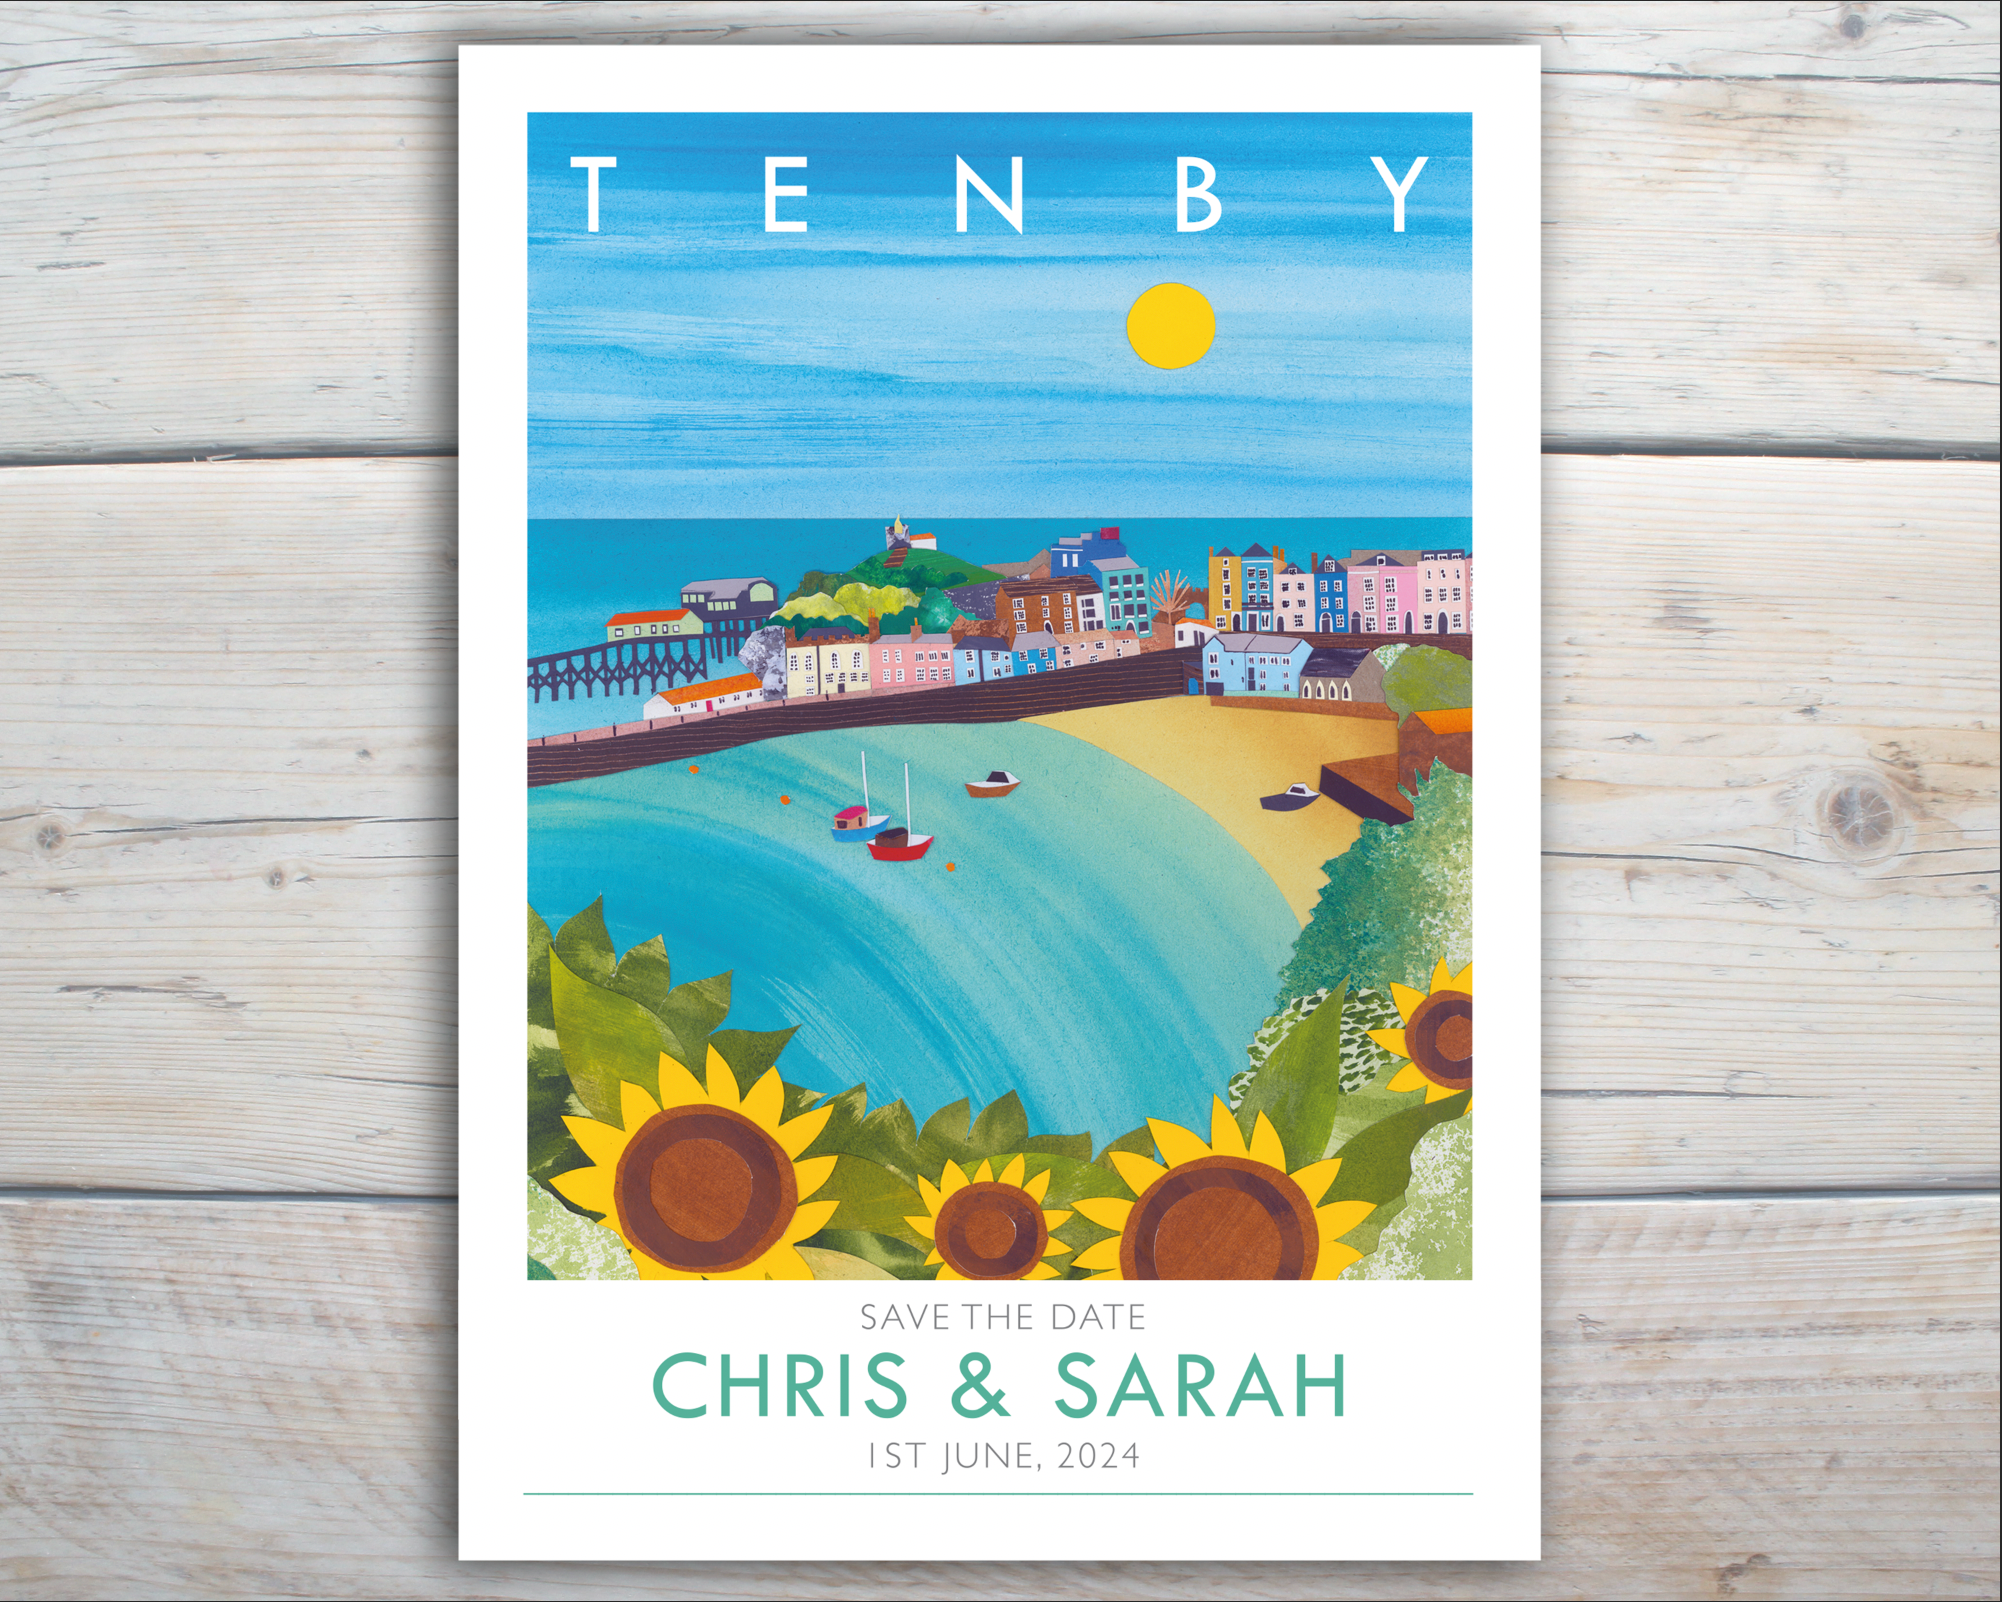 An illustrated wedding invitations featuring a bright collage of Tenby, Wales lays on a grey wooden background